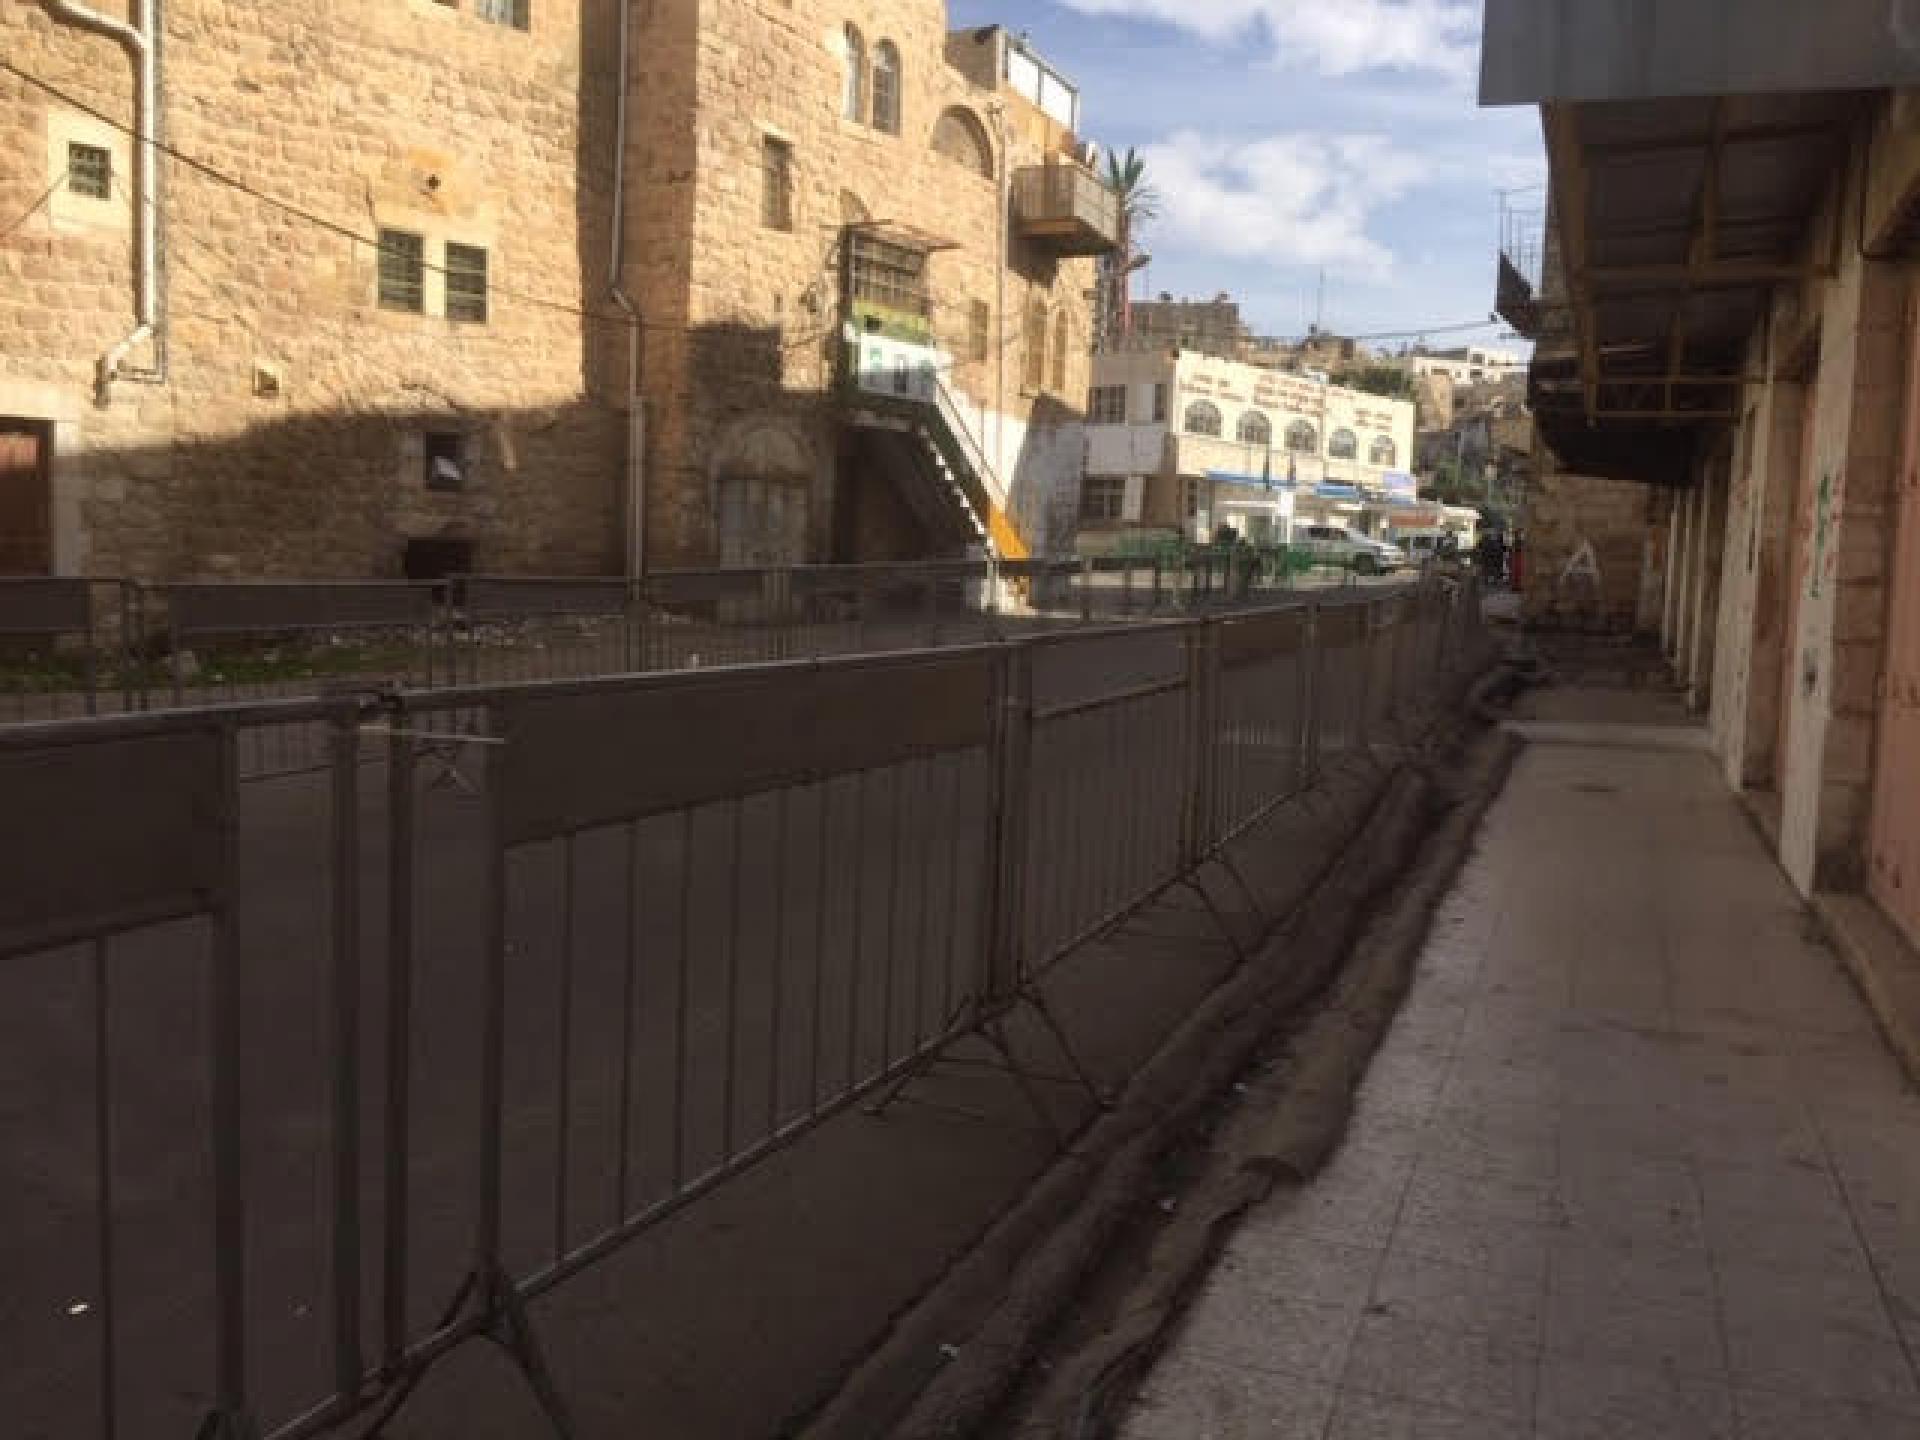 Fences prepared for the expected Muslim prayers